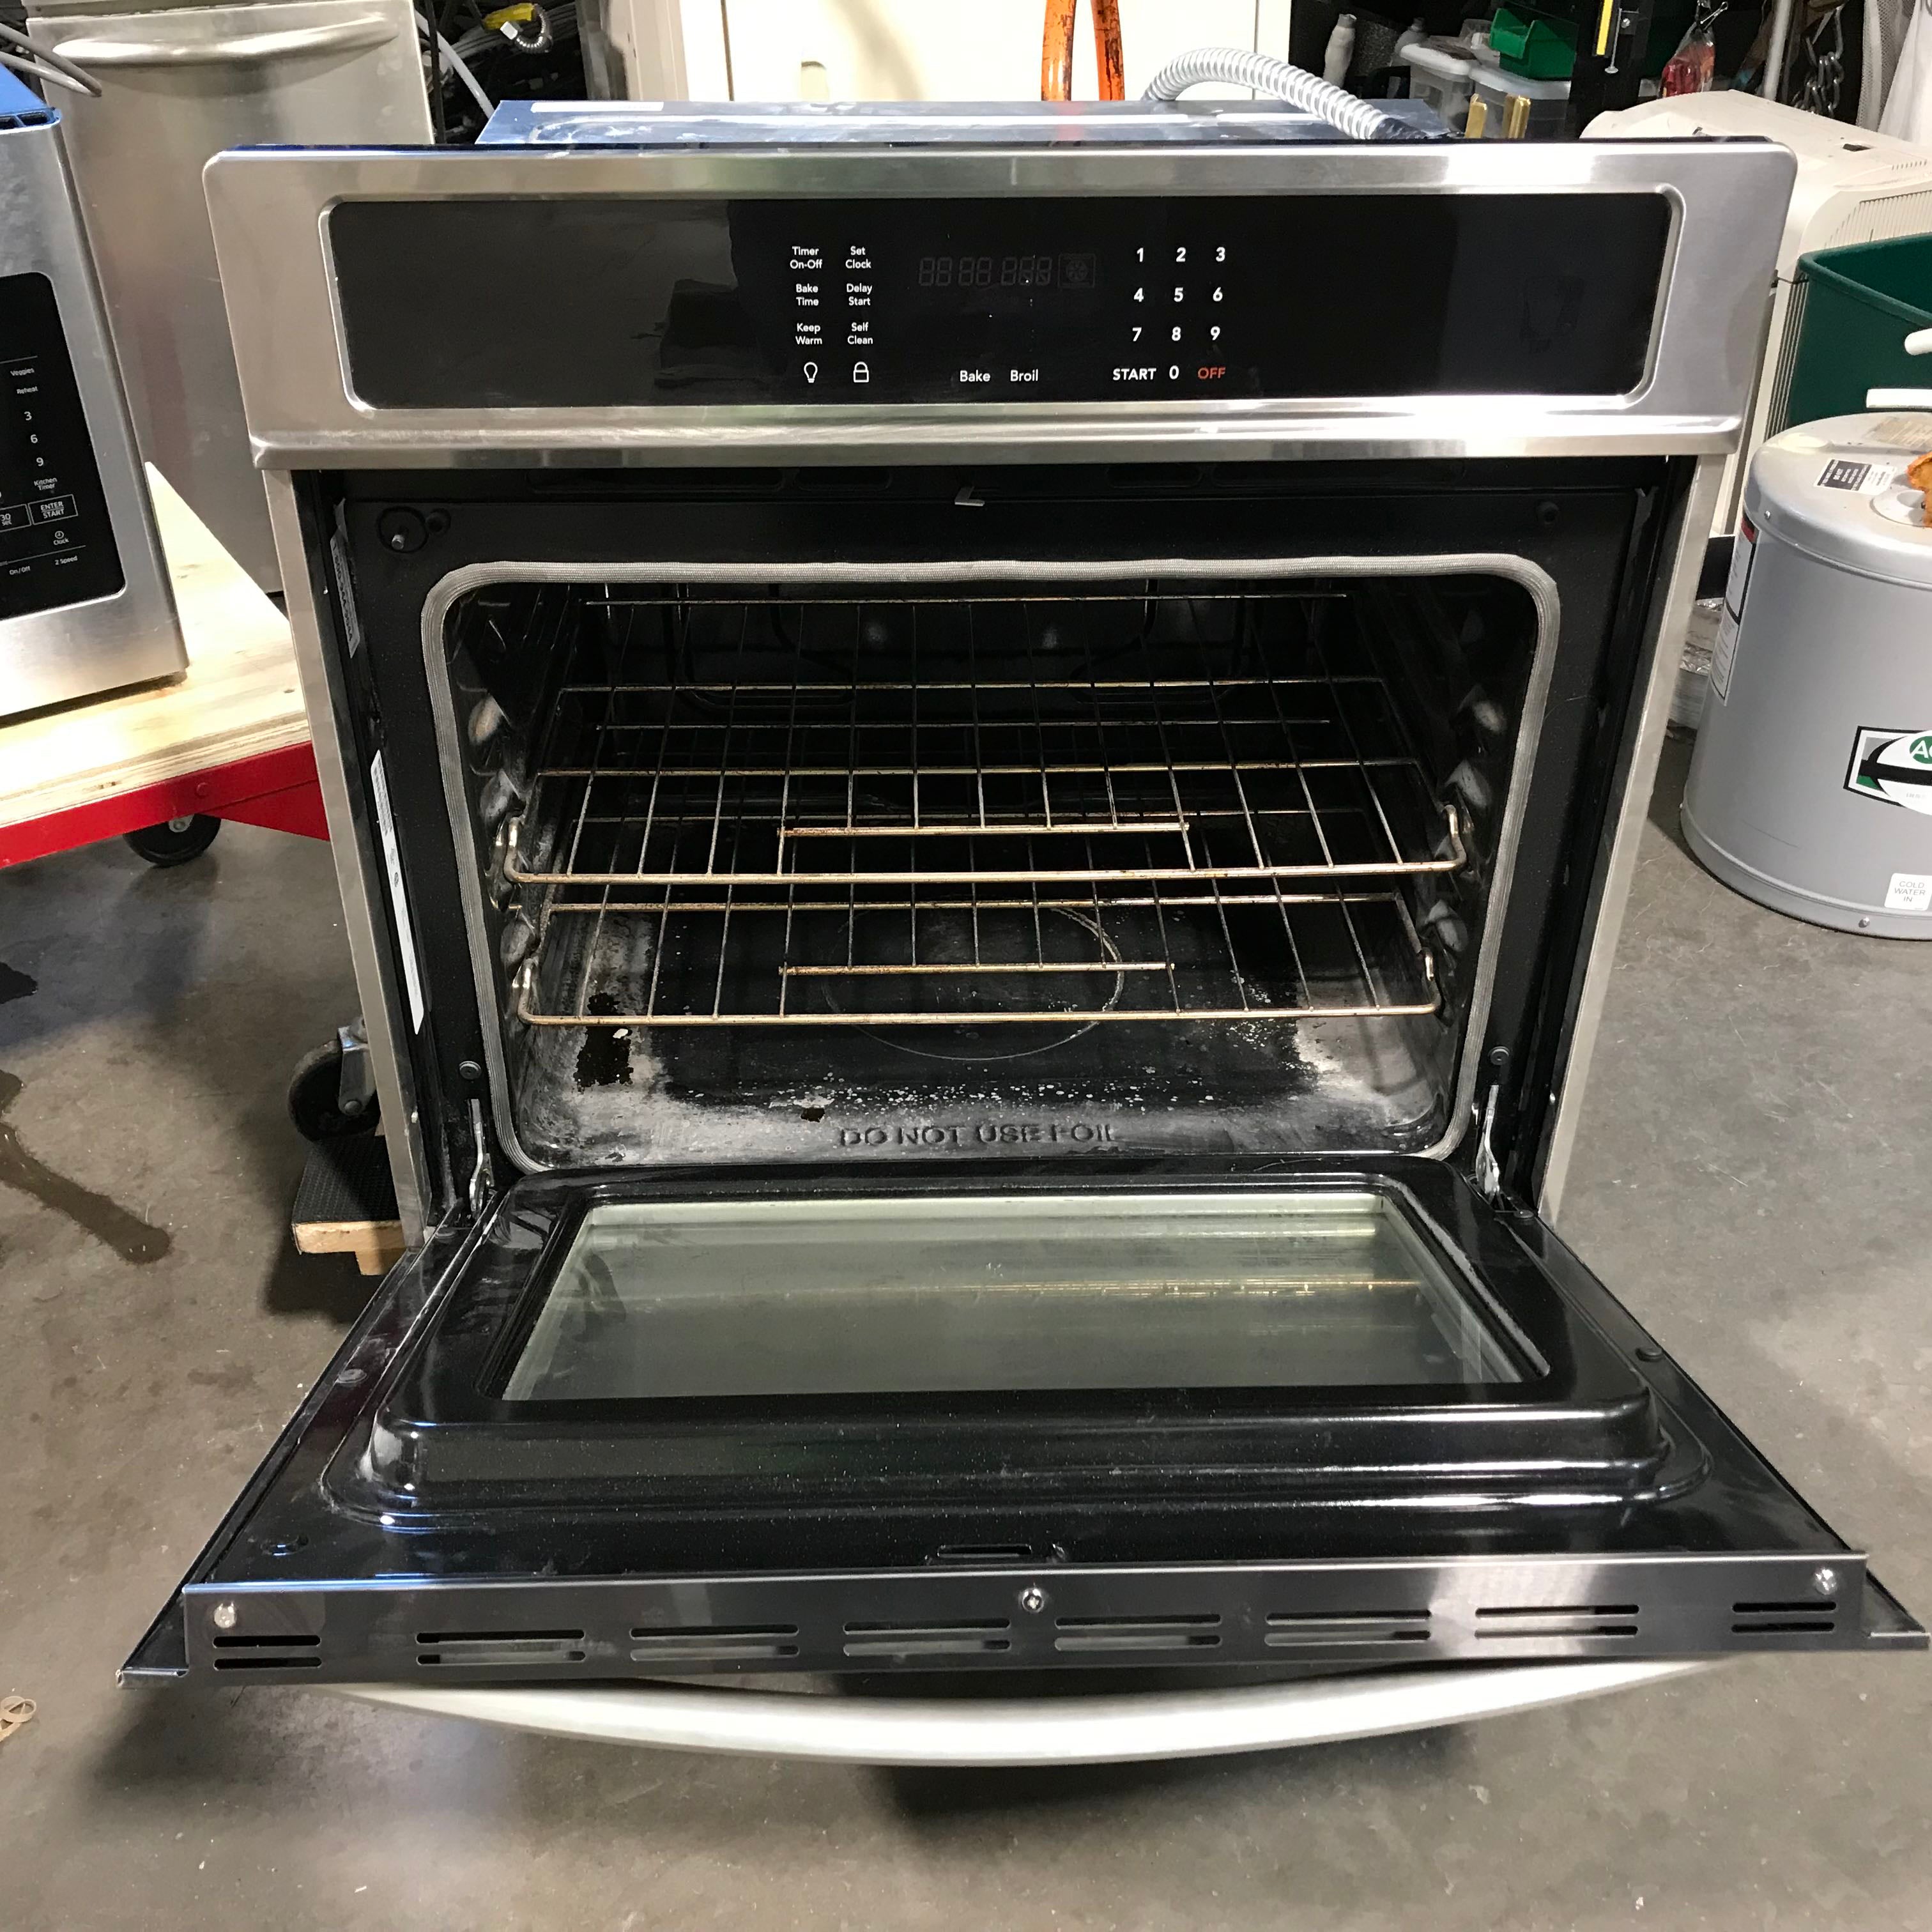 30"x 27"x 27.5" Frigidaire Stainless Steel Wall Oven